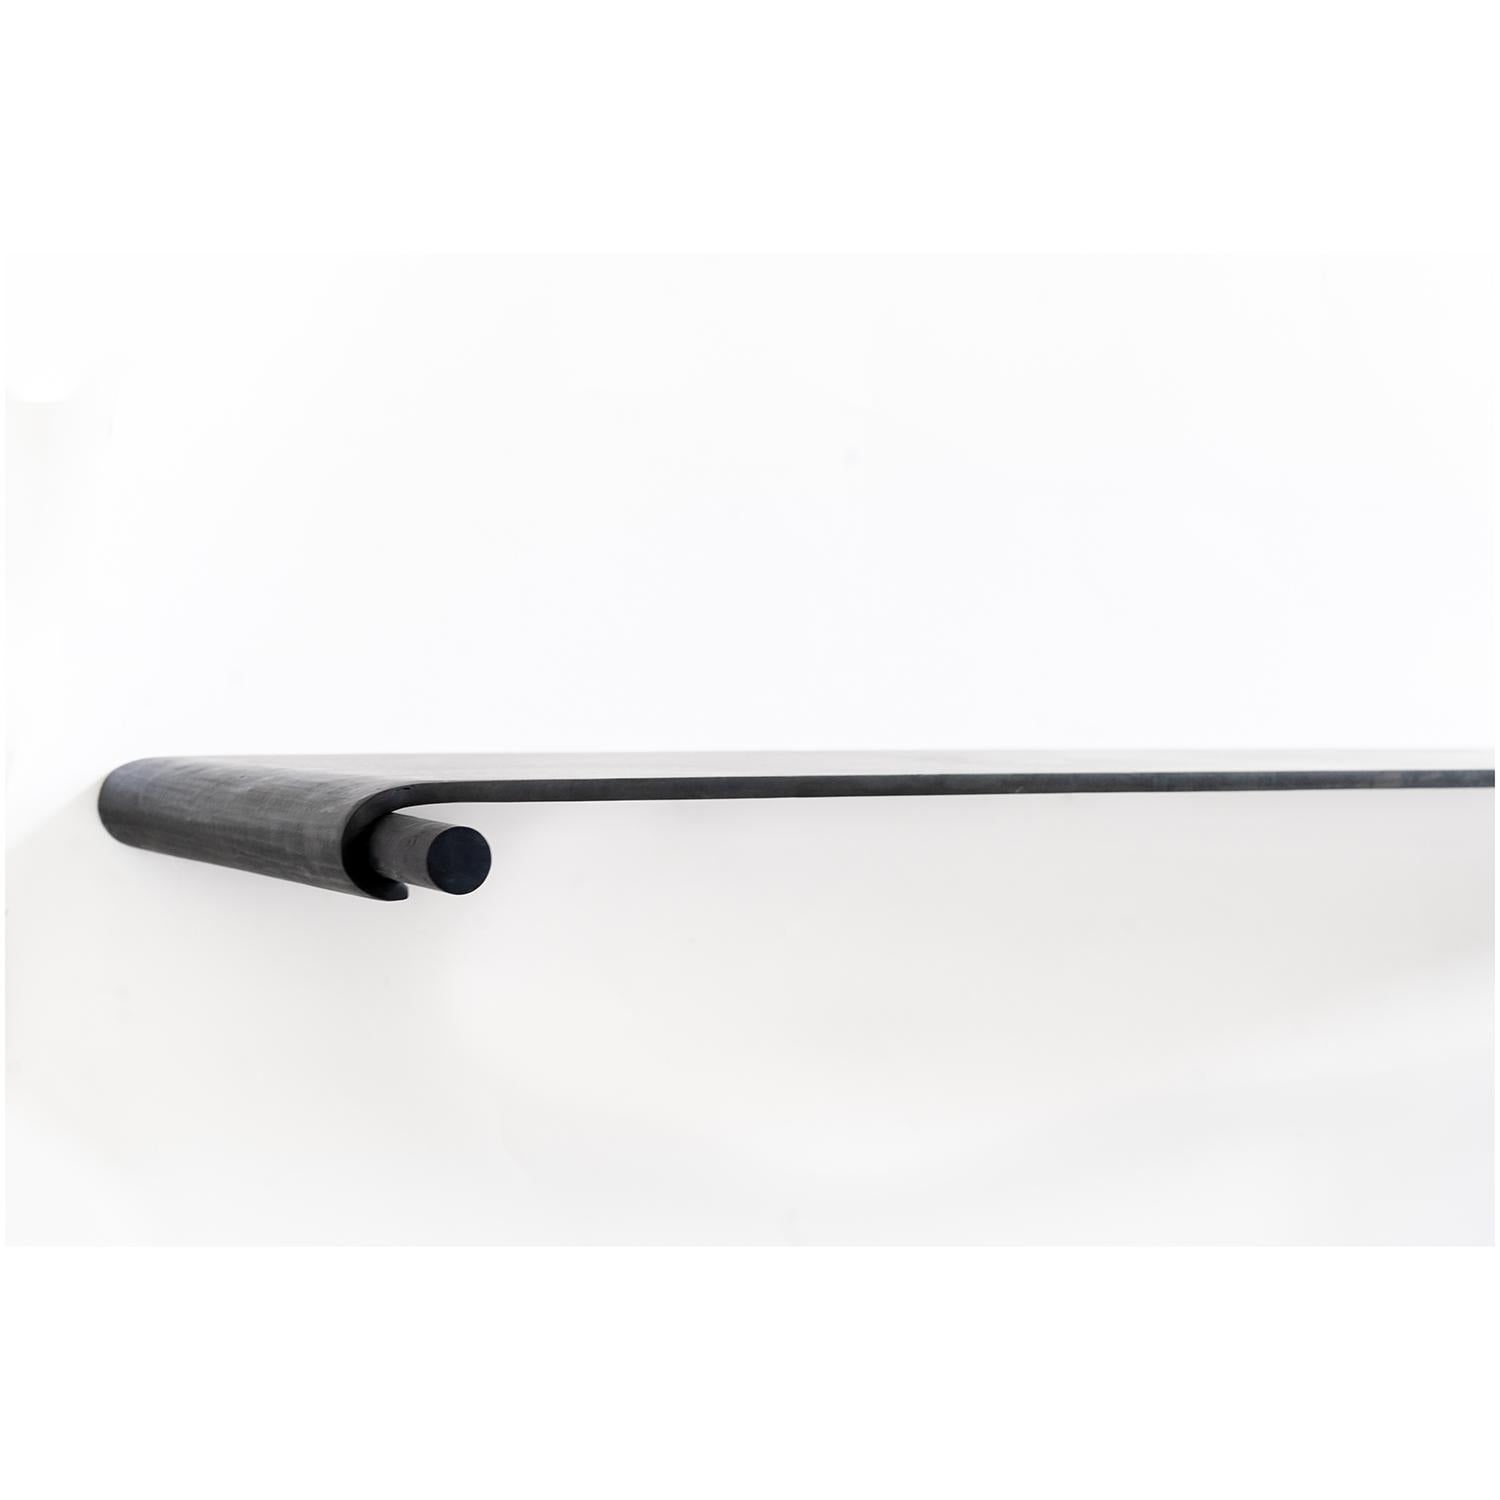 CONSOLE NO. 4 
J.M. Szymanski
d. 2020

A sleek table, bent from a seamless piece of 3/8” thick steel. The table appears to float on a single peg. The table is attached to a wall from the underside of the table.

Custom sizes available. Made in the